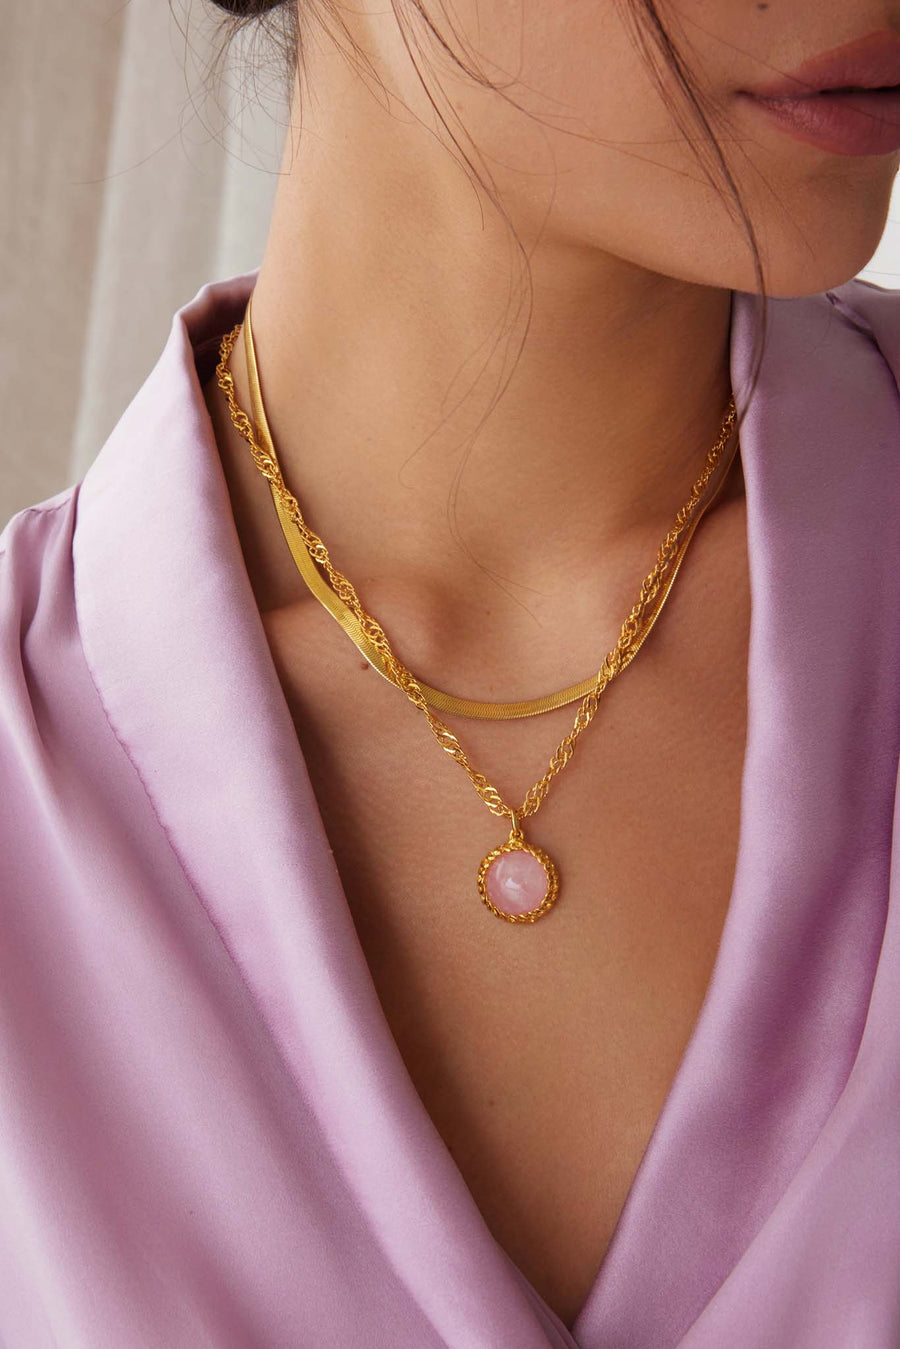 model shot of the PINK ROSE QUARTZ pendant necklace on a gold twisted chain